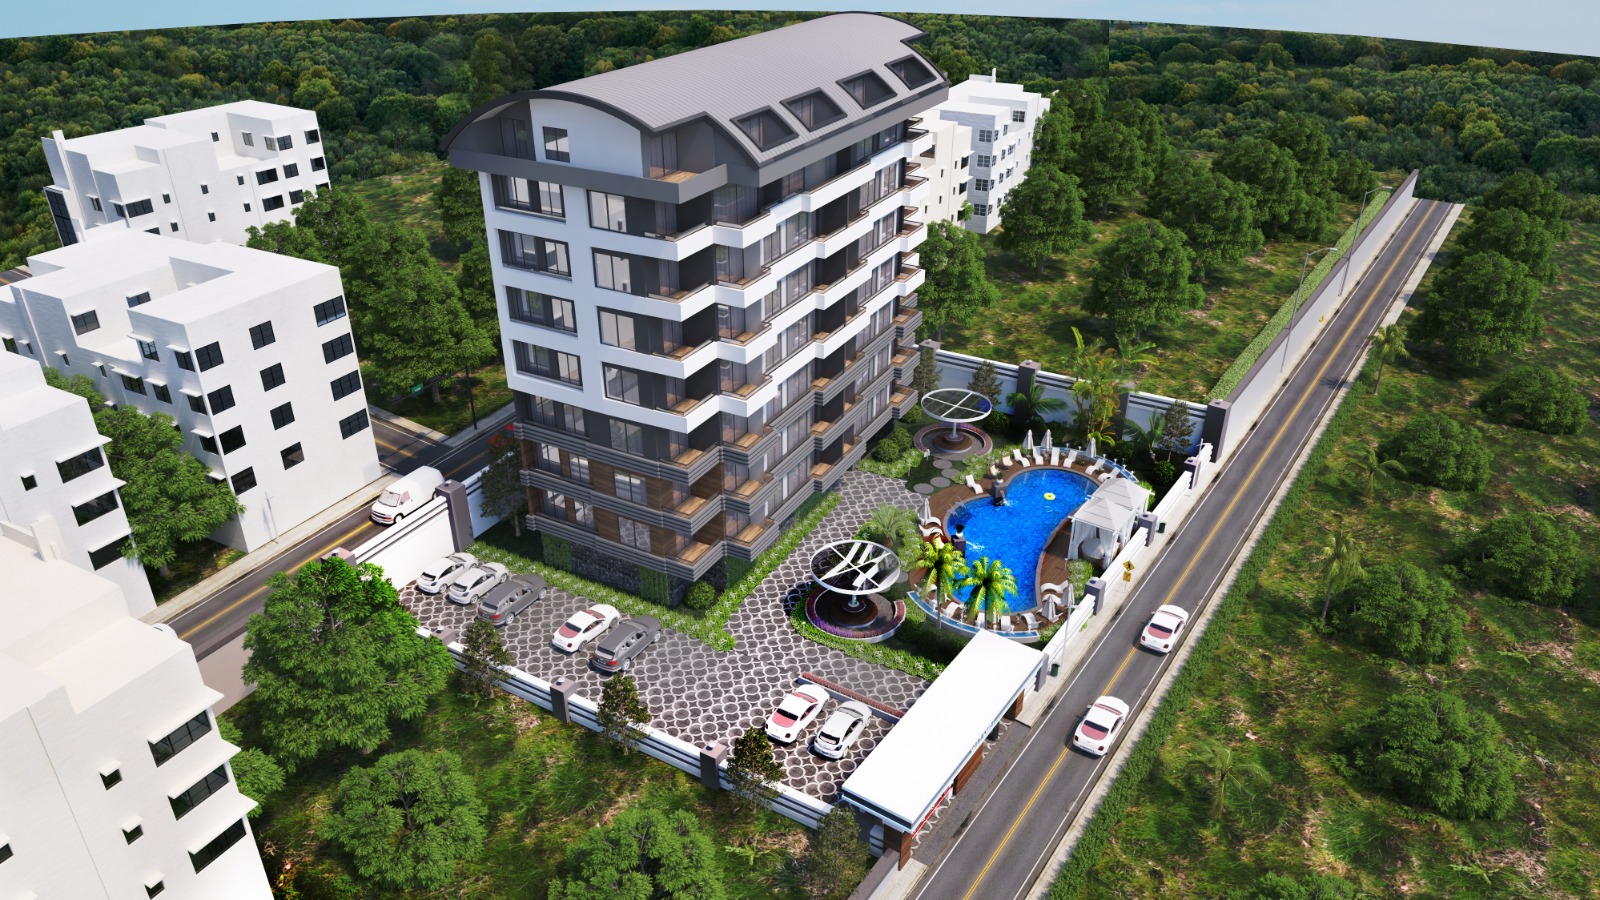 Investment project in Avsallar, Alanya. Apartments layout 1+1, 42-55 m2 and 2+1, 65-130 m2. Installment plan with a down payment of 30%. фото 1